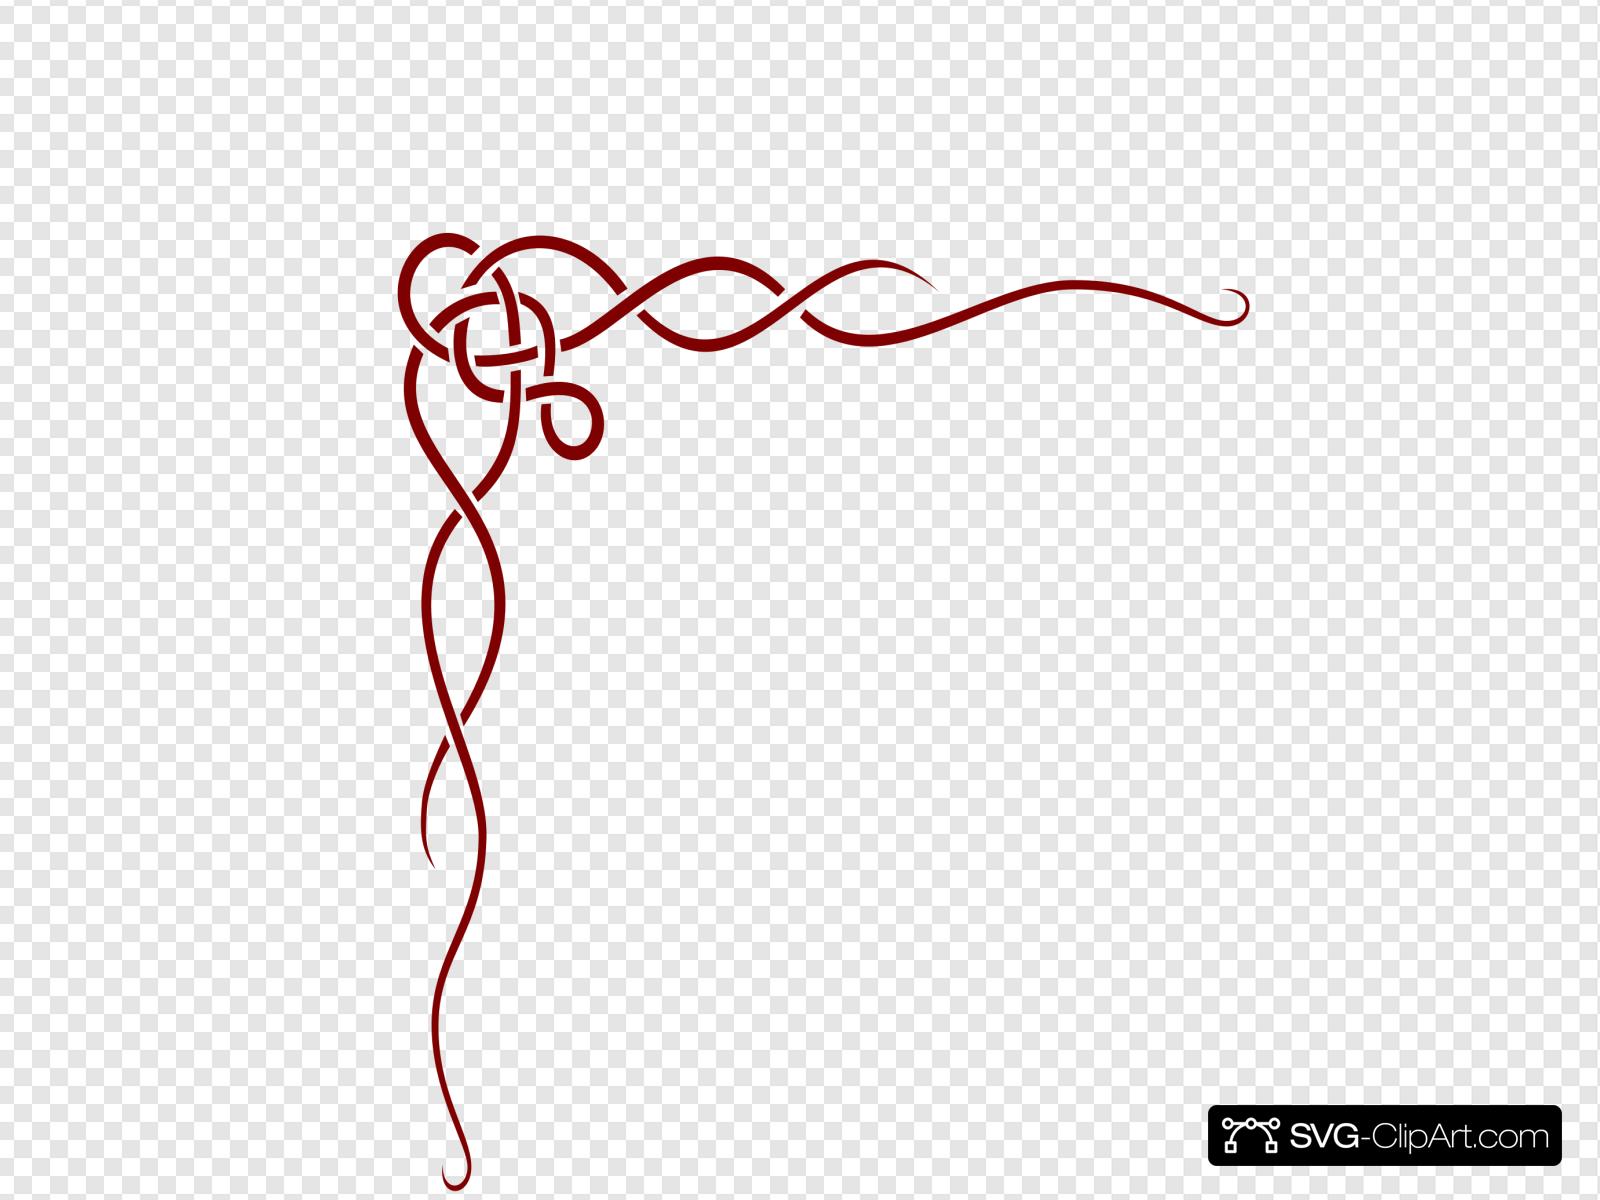 Large Corner Scroll Red Clip art, Icon and SVG